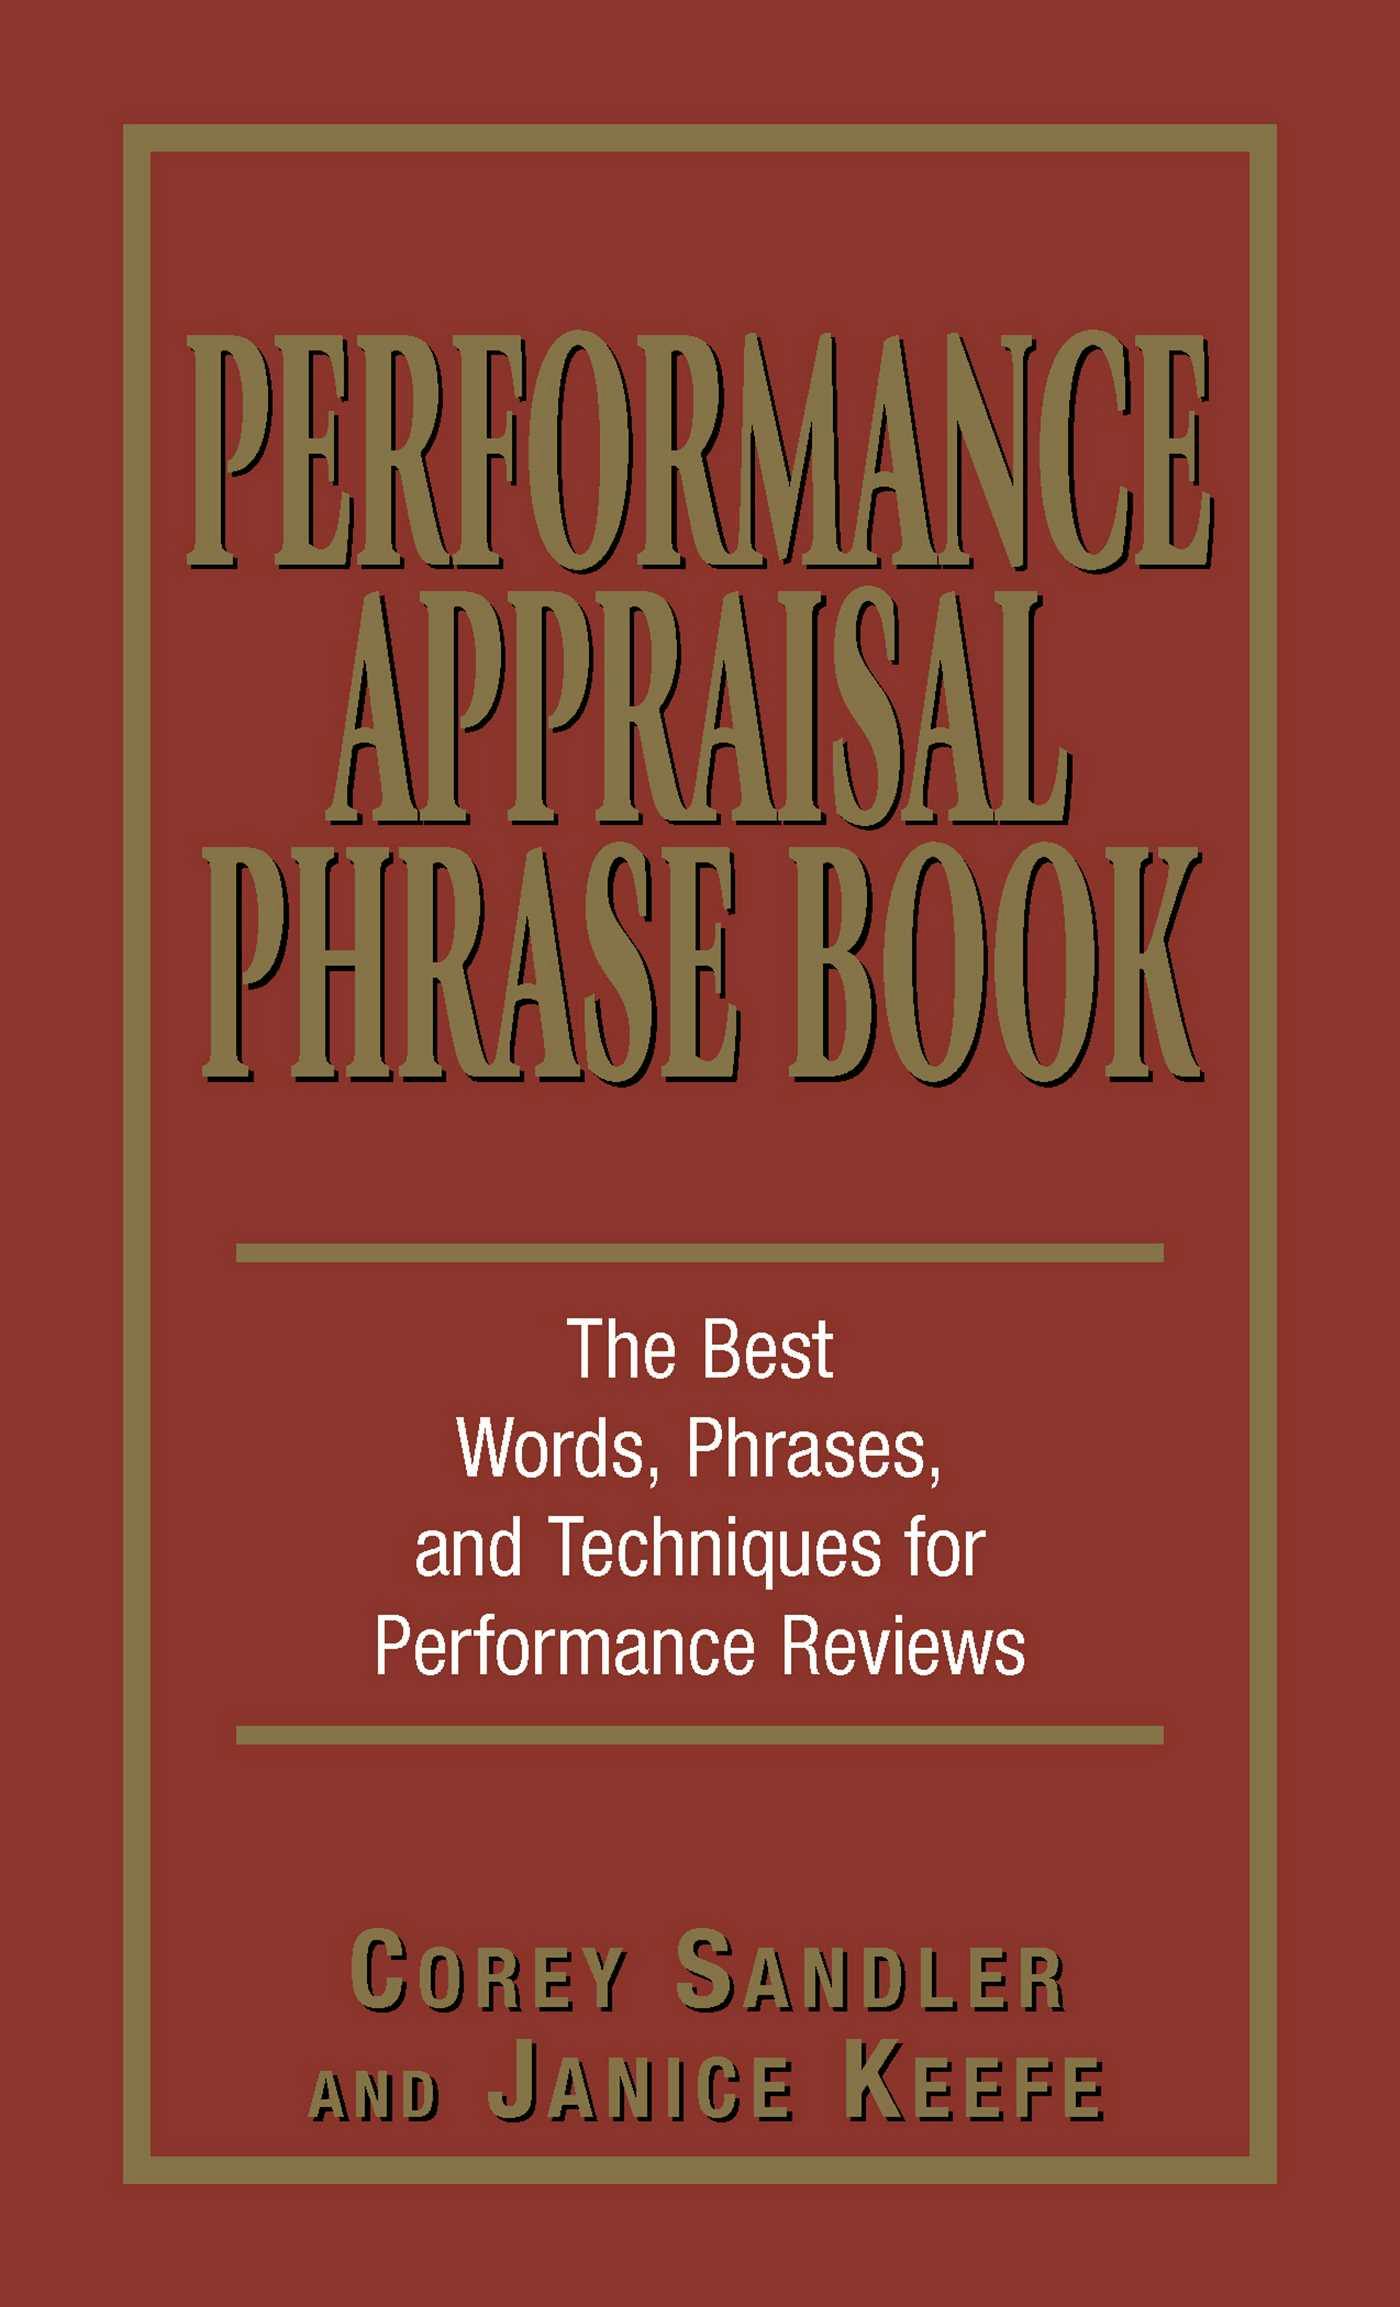 Performance Appraisal Phrase Book: The Best Words, Phrases, and Techniques for Performace Reviews - Corey Sandler, Janice Keefe